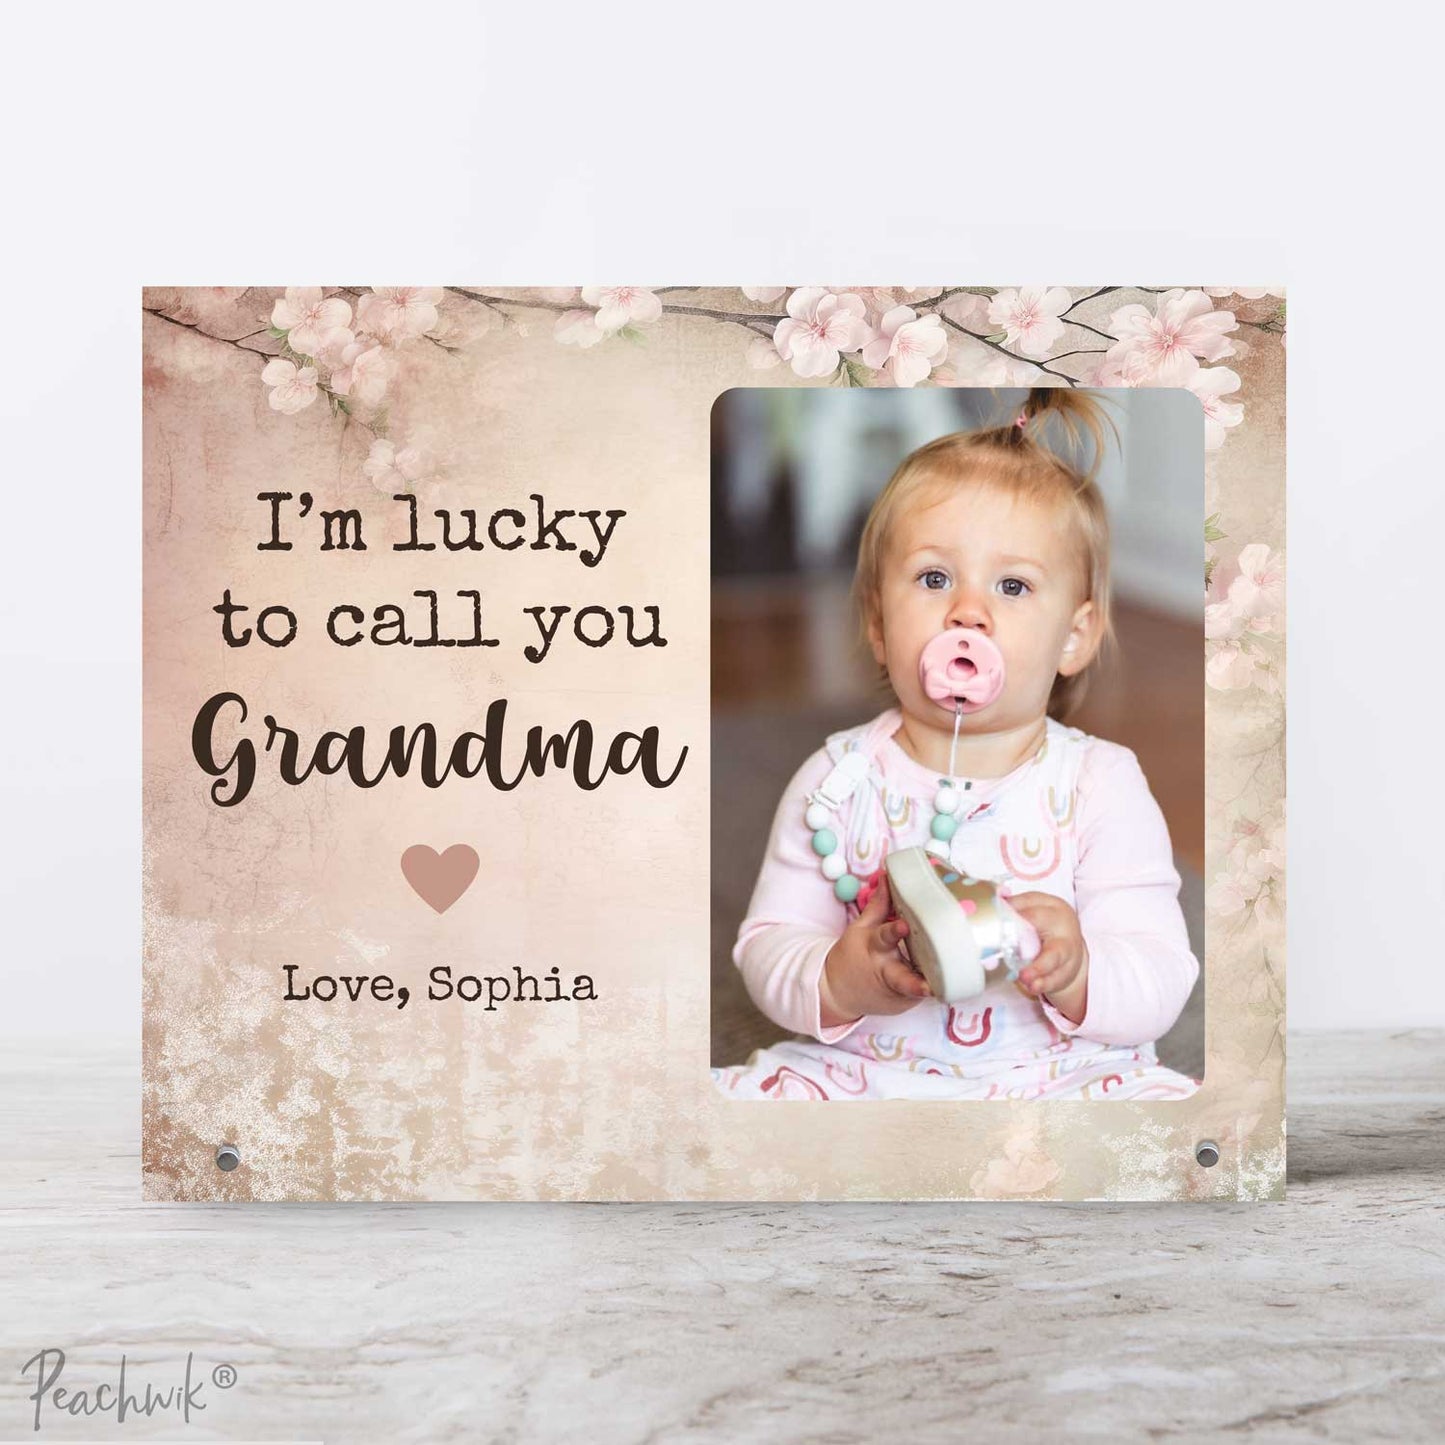 New Grandmother Gift Personalized Metal Photo Plaque